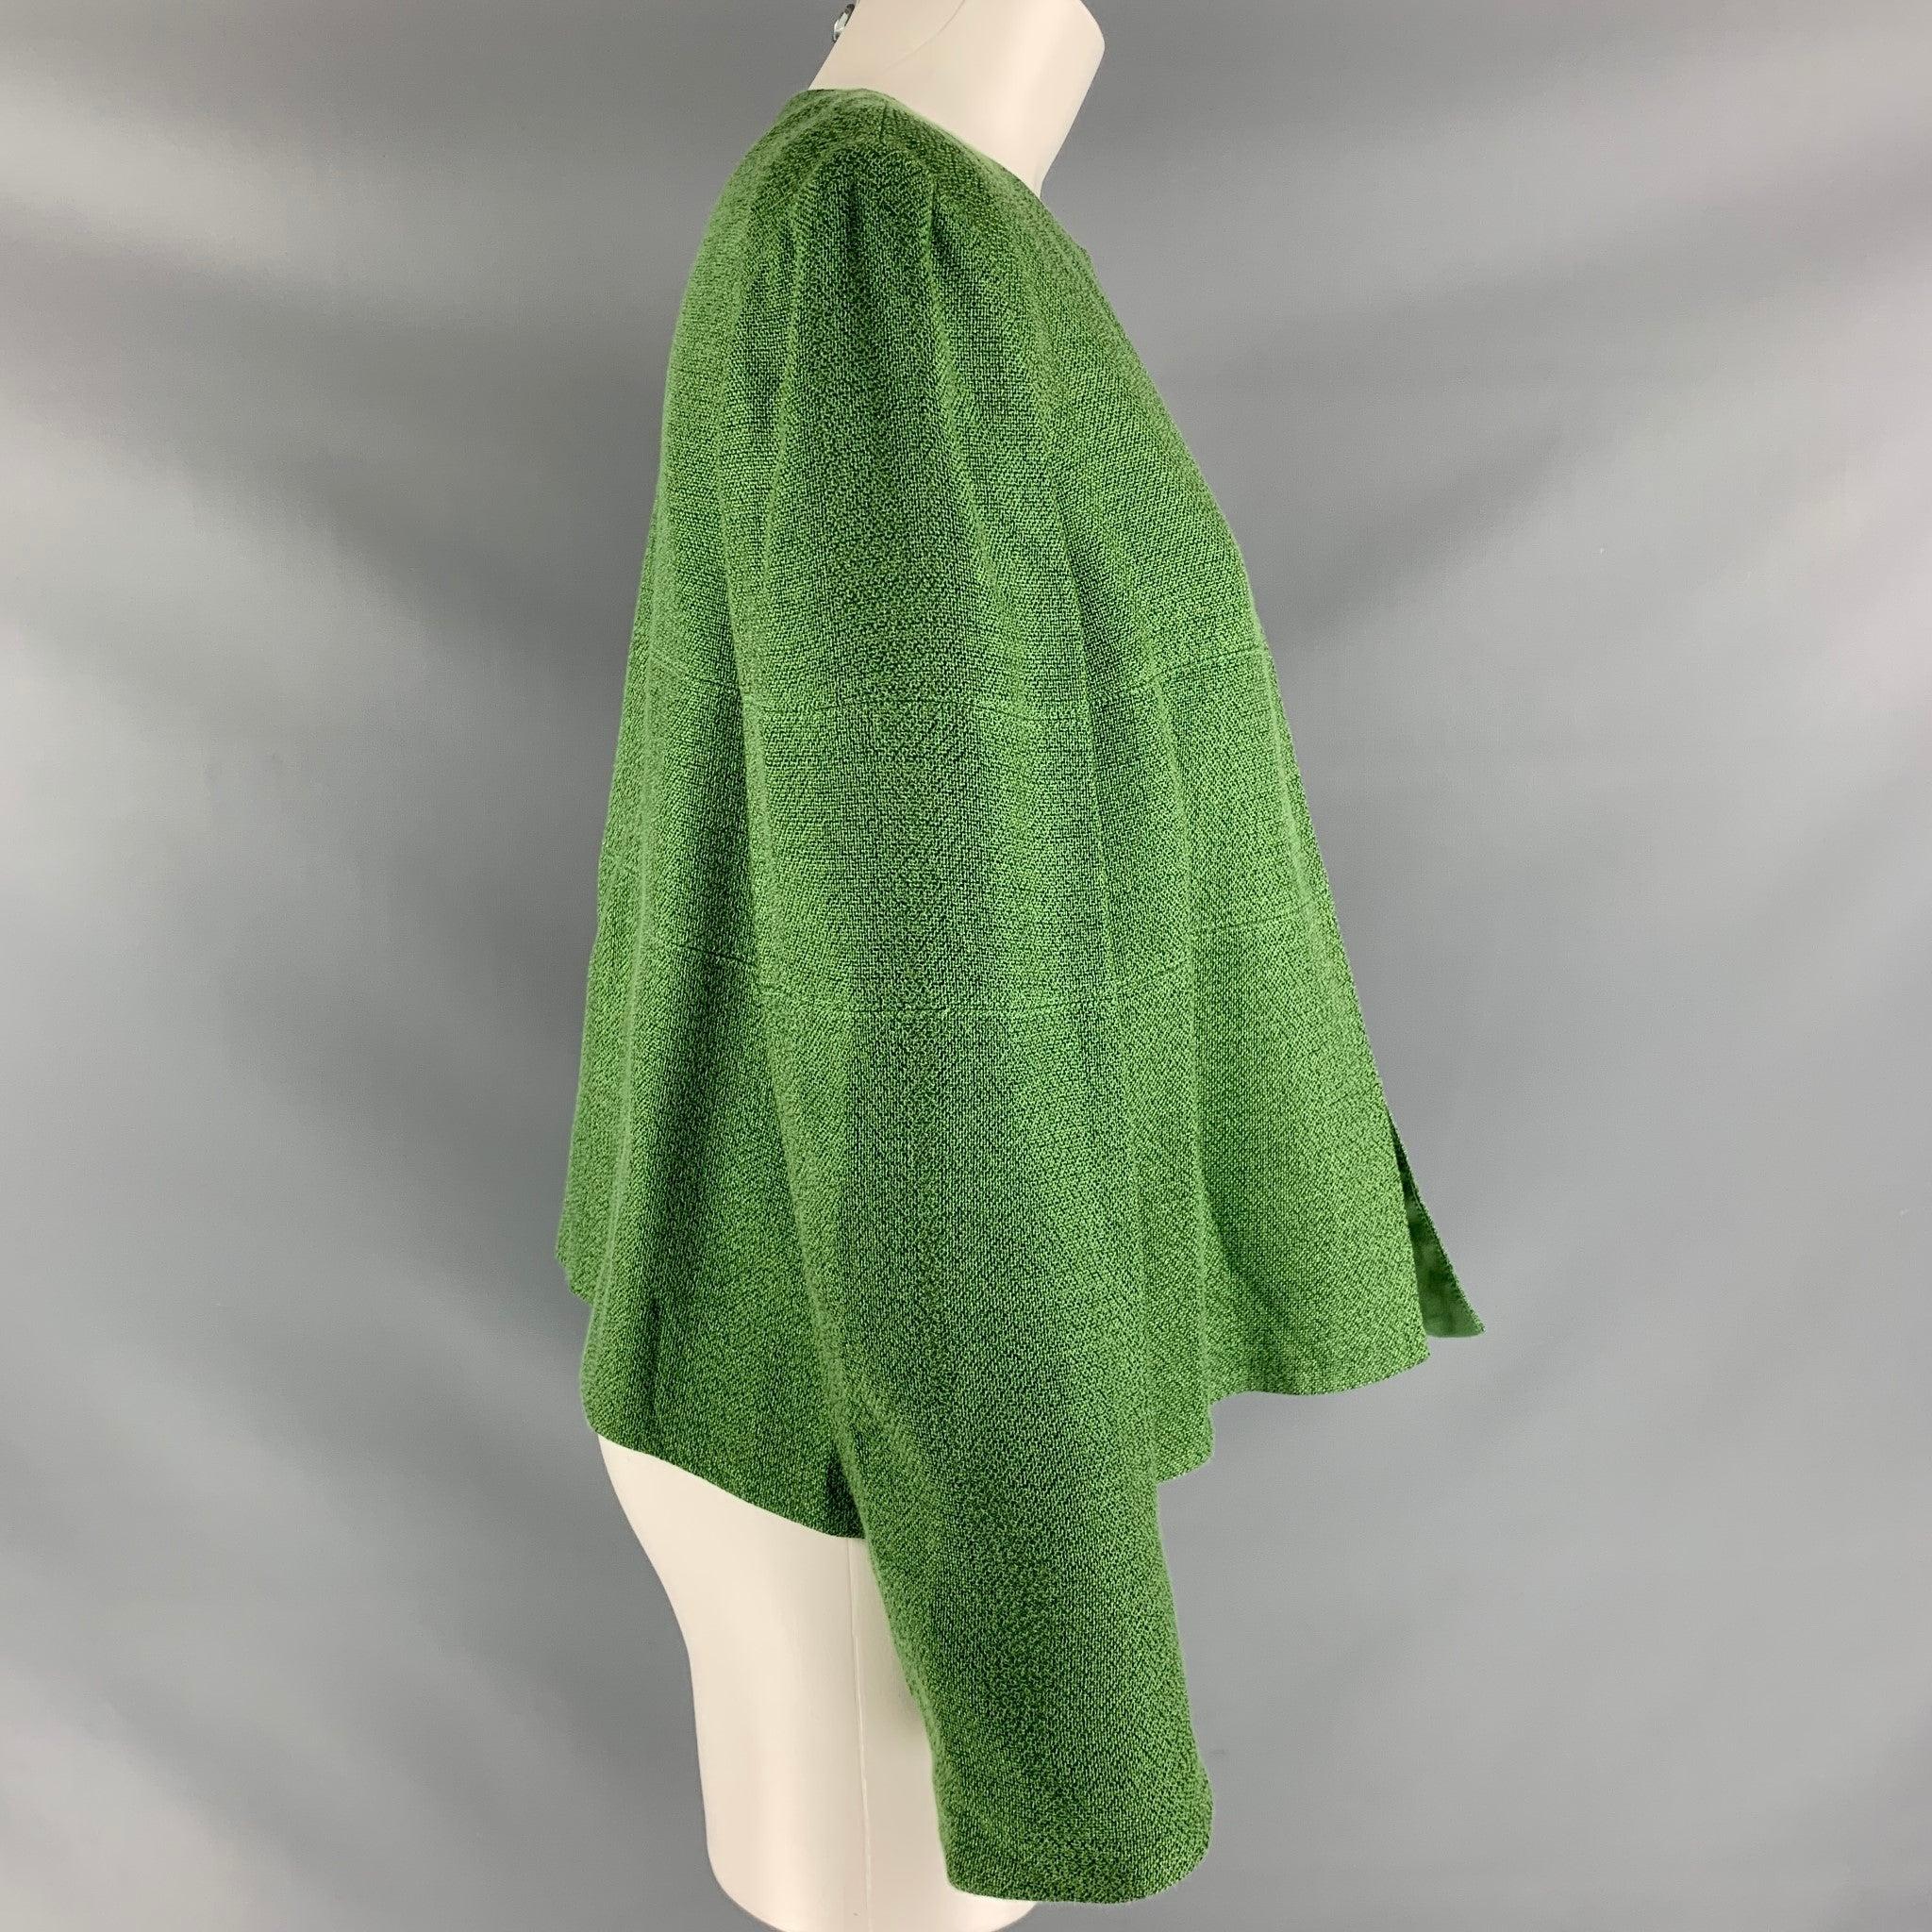 ARMANI COLLEZIONI long sleeve jacket comes in green viscose blend fabric, no collar and boxy silhouette. New with Tag. 
 

 Marked:  12 
 

 Measurements: 
  
 Shoulder: 16.5 inBust: 42 inSleeve: 25 inLength: 24 in
 

  
  
  
 Sui Generis